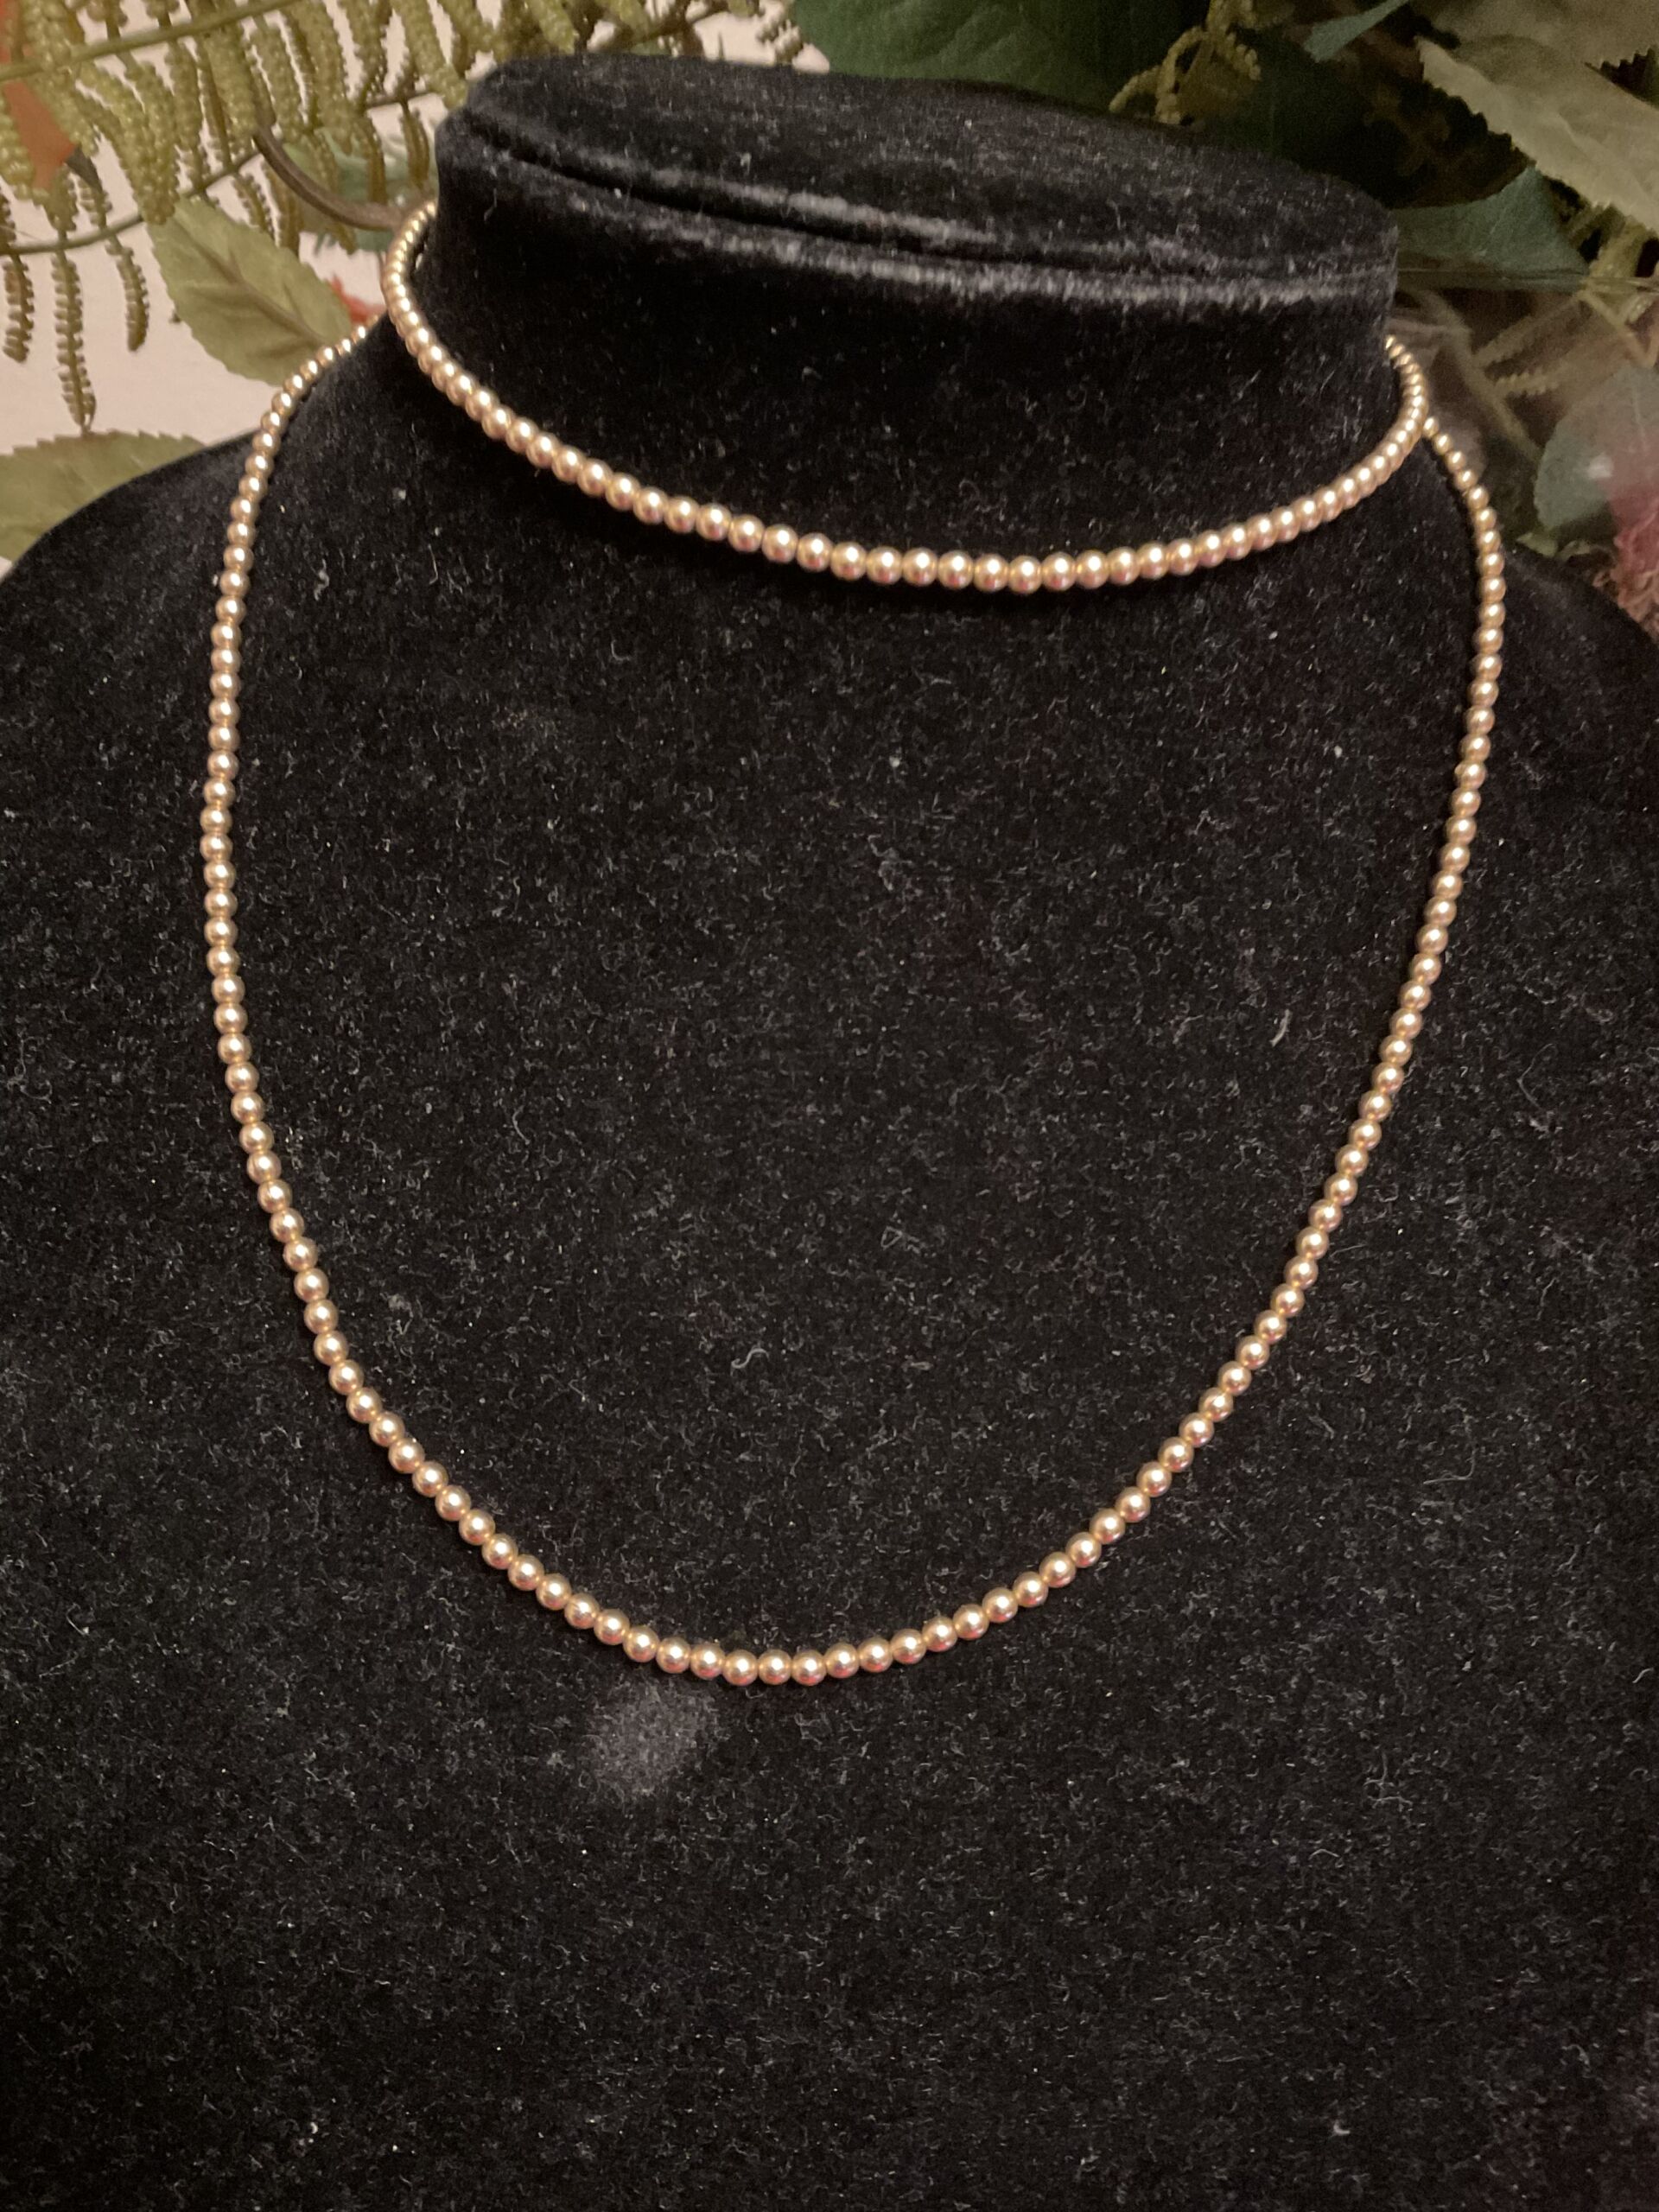 14k Yellow Gold Bead Ball Necklace 16 Inches Pre-owned condition 17.11 grams